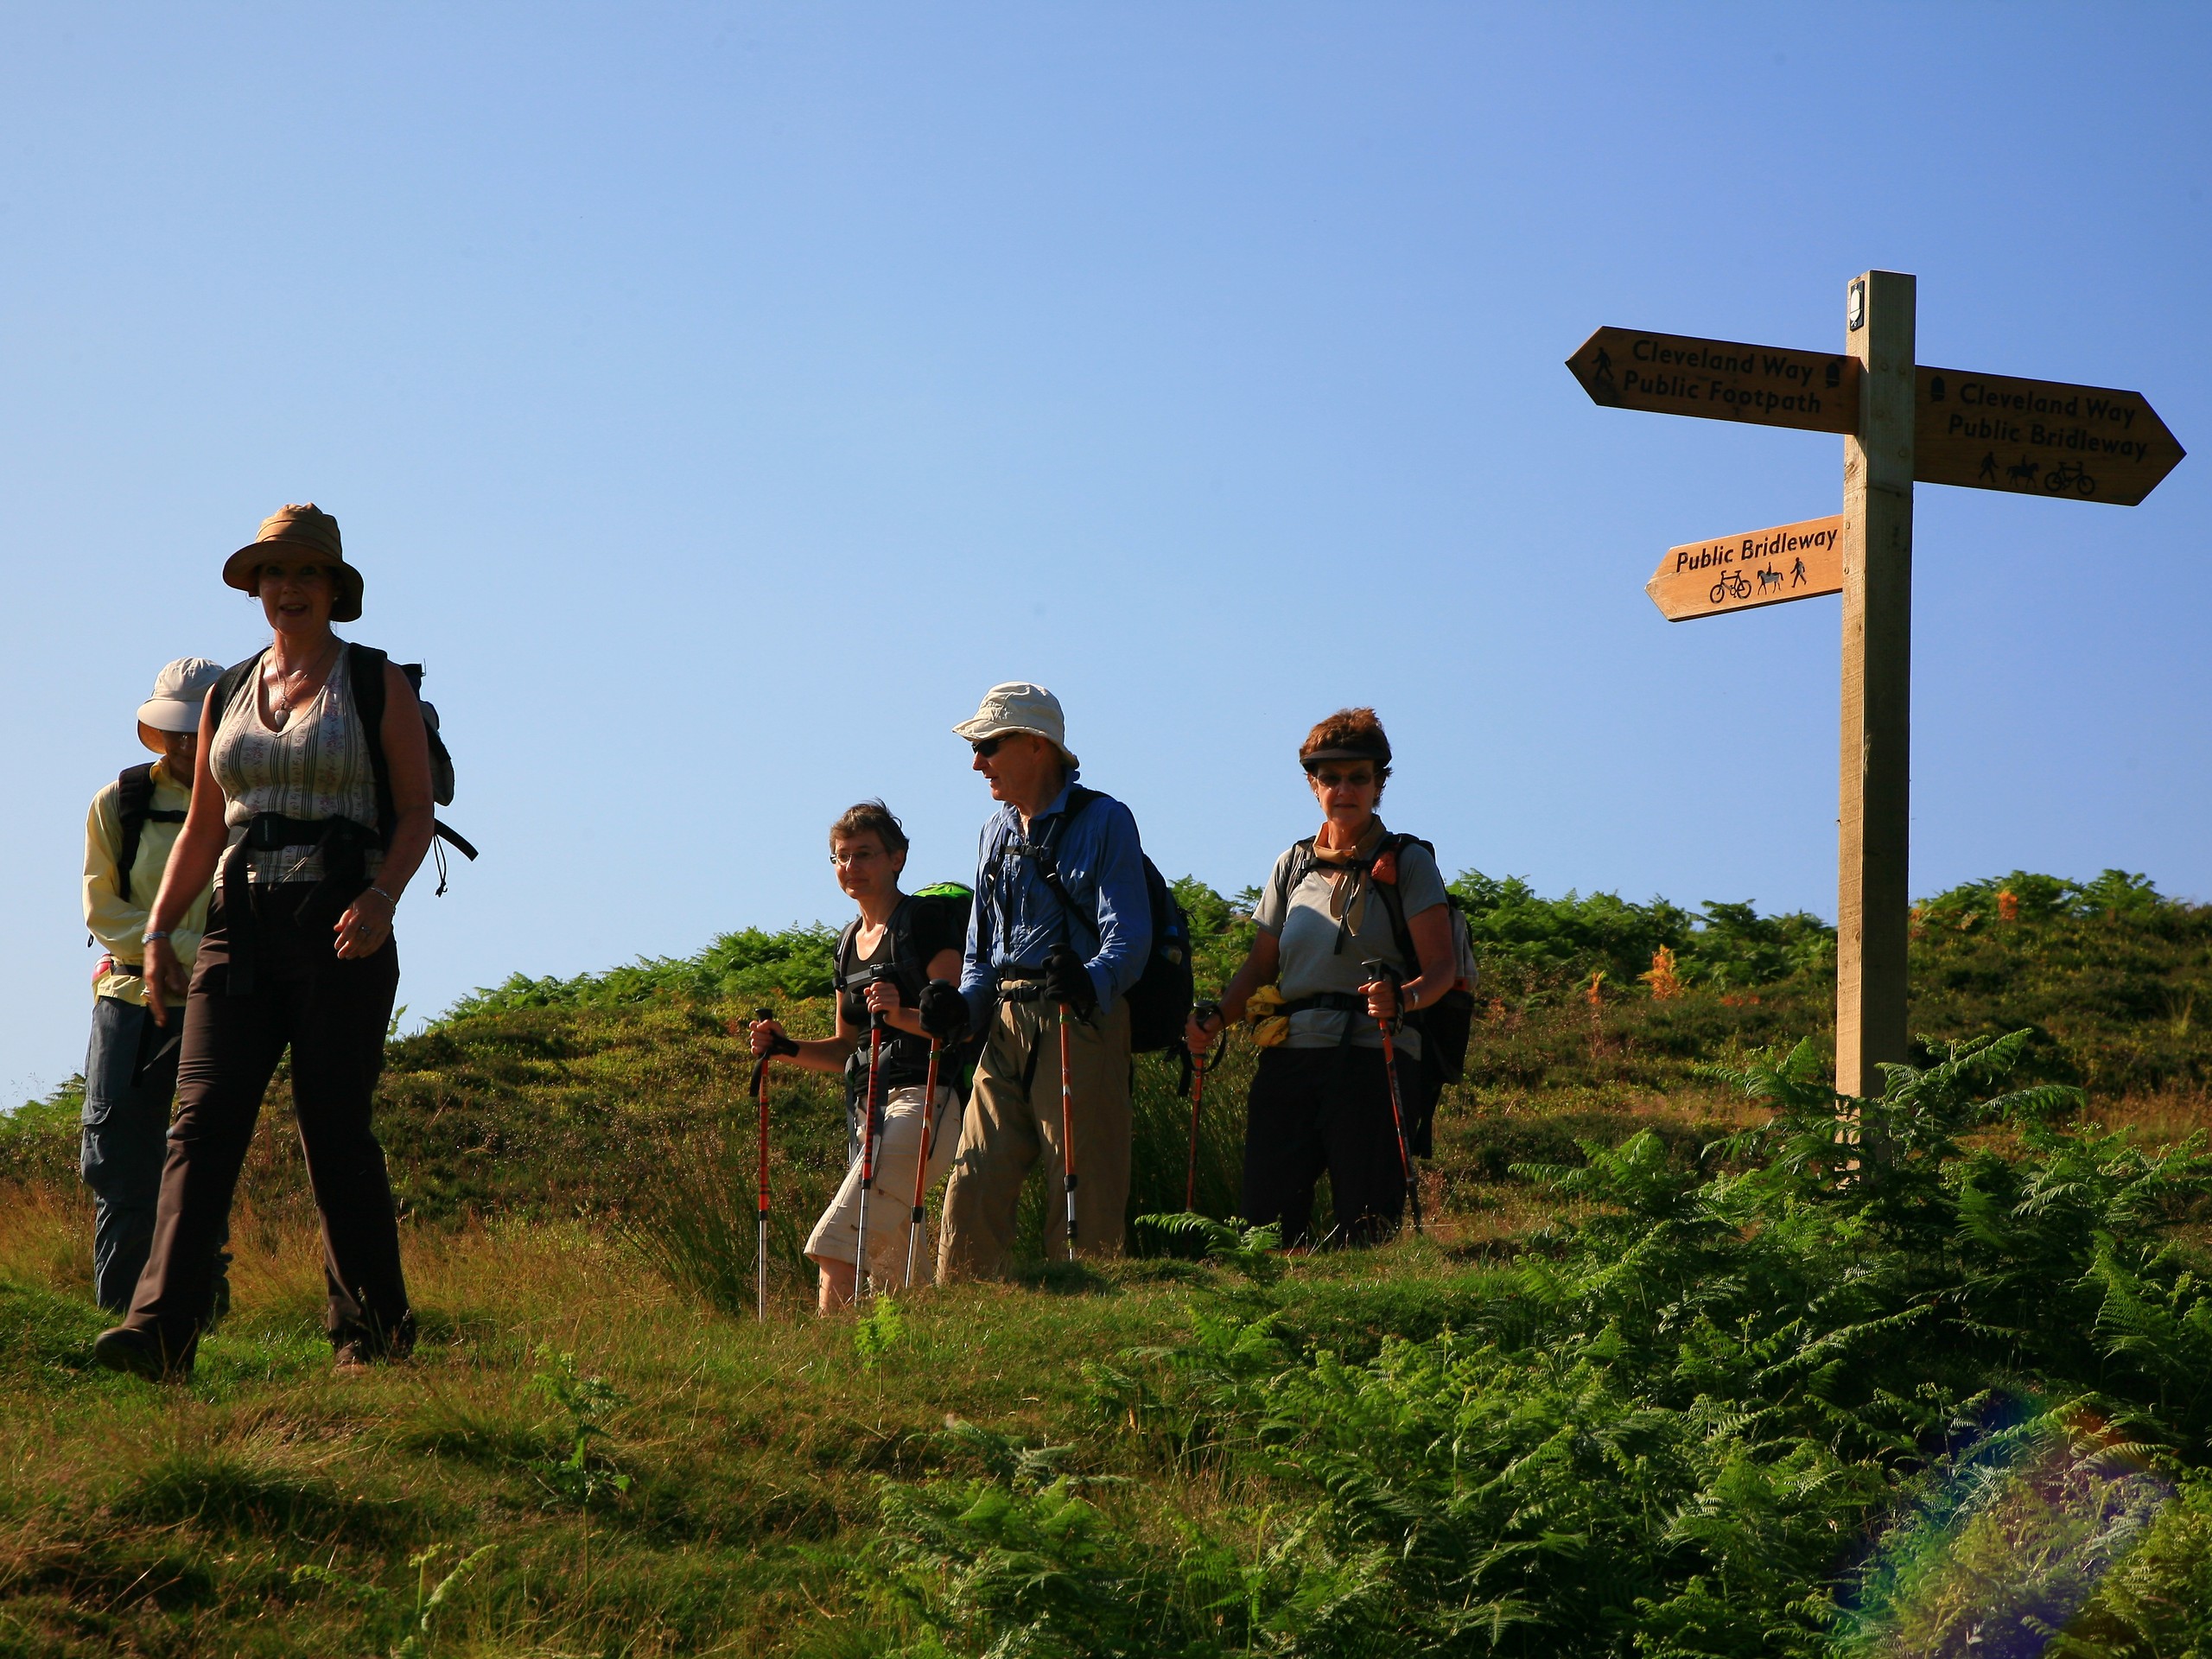 Entering the Cleveland Way path while on Coast to Coast trail (c)John Millen